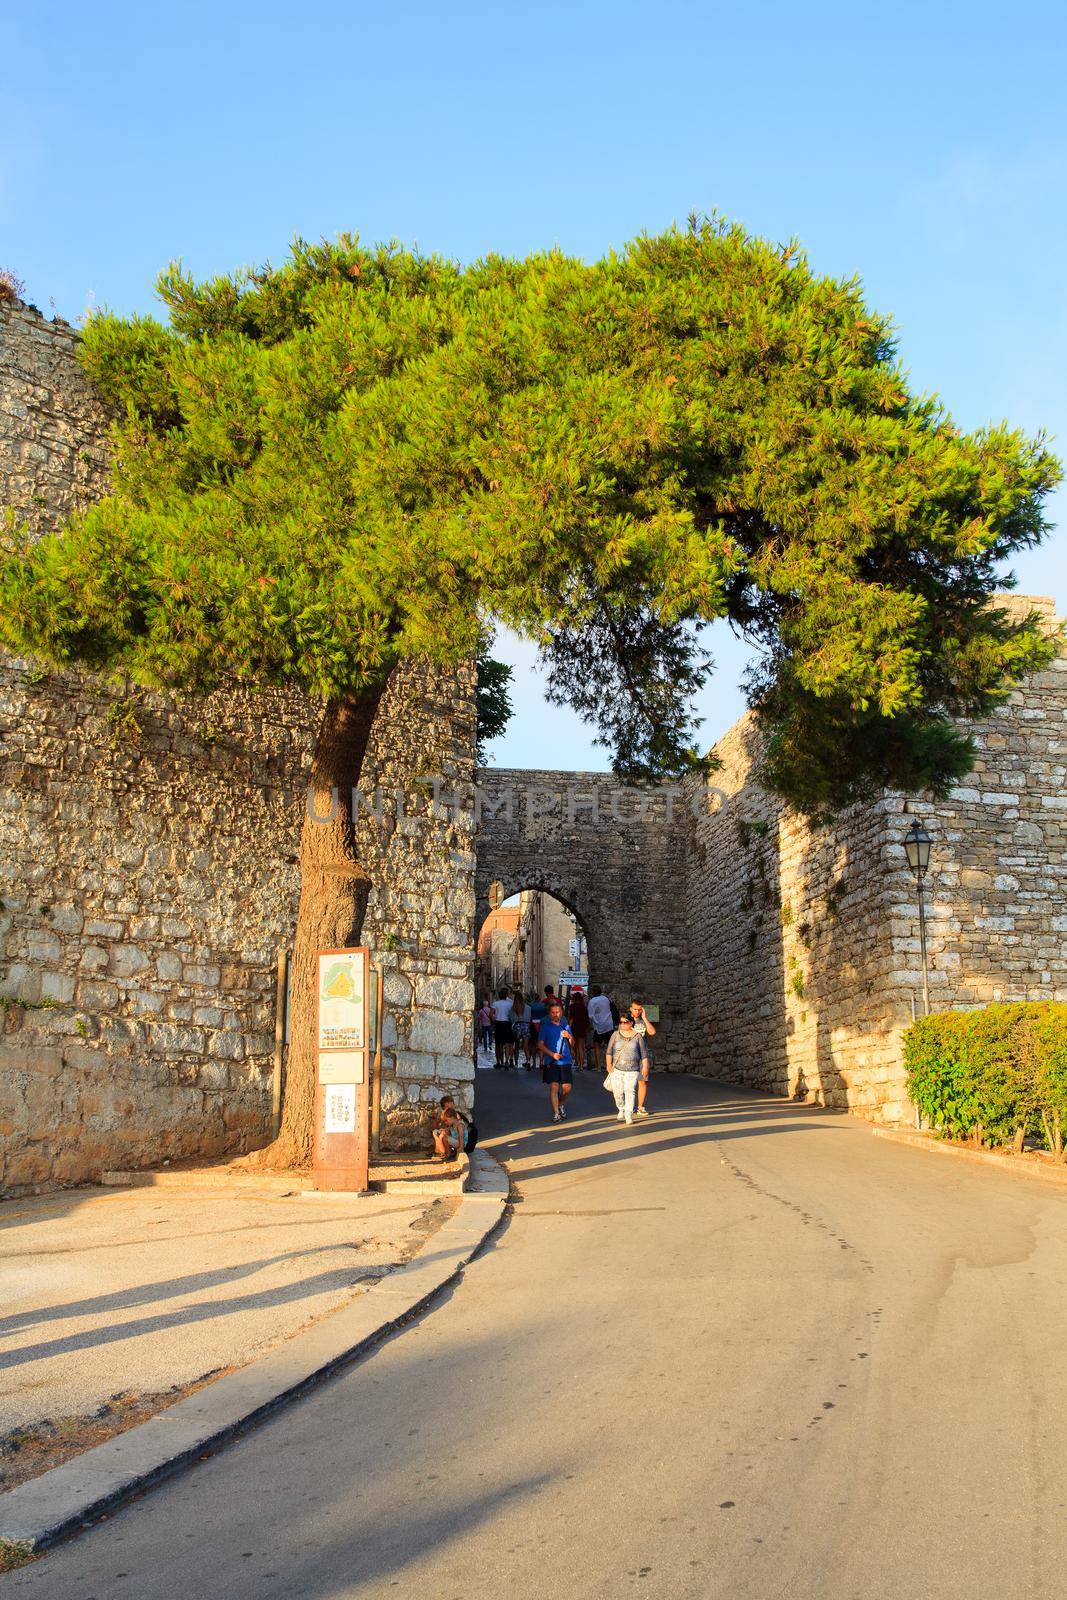 ERICE, ITALY - AUGUST 05: View of the entrance of punic fortification called Porta Trapani on August 05, 2015